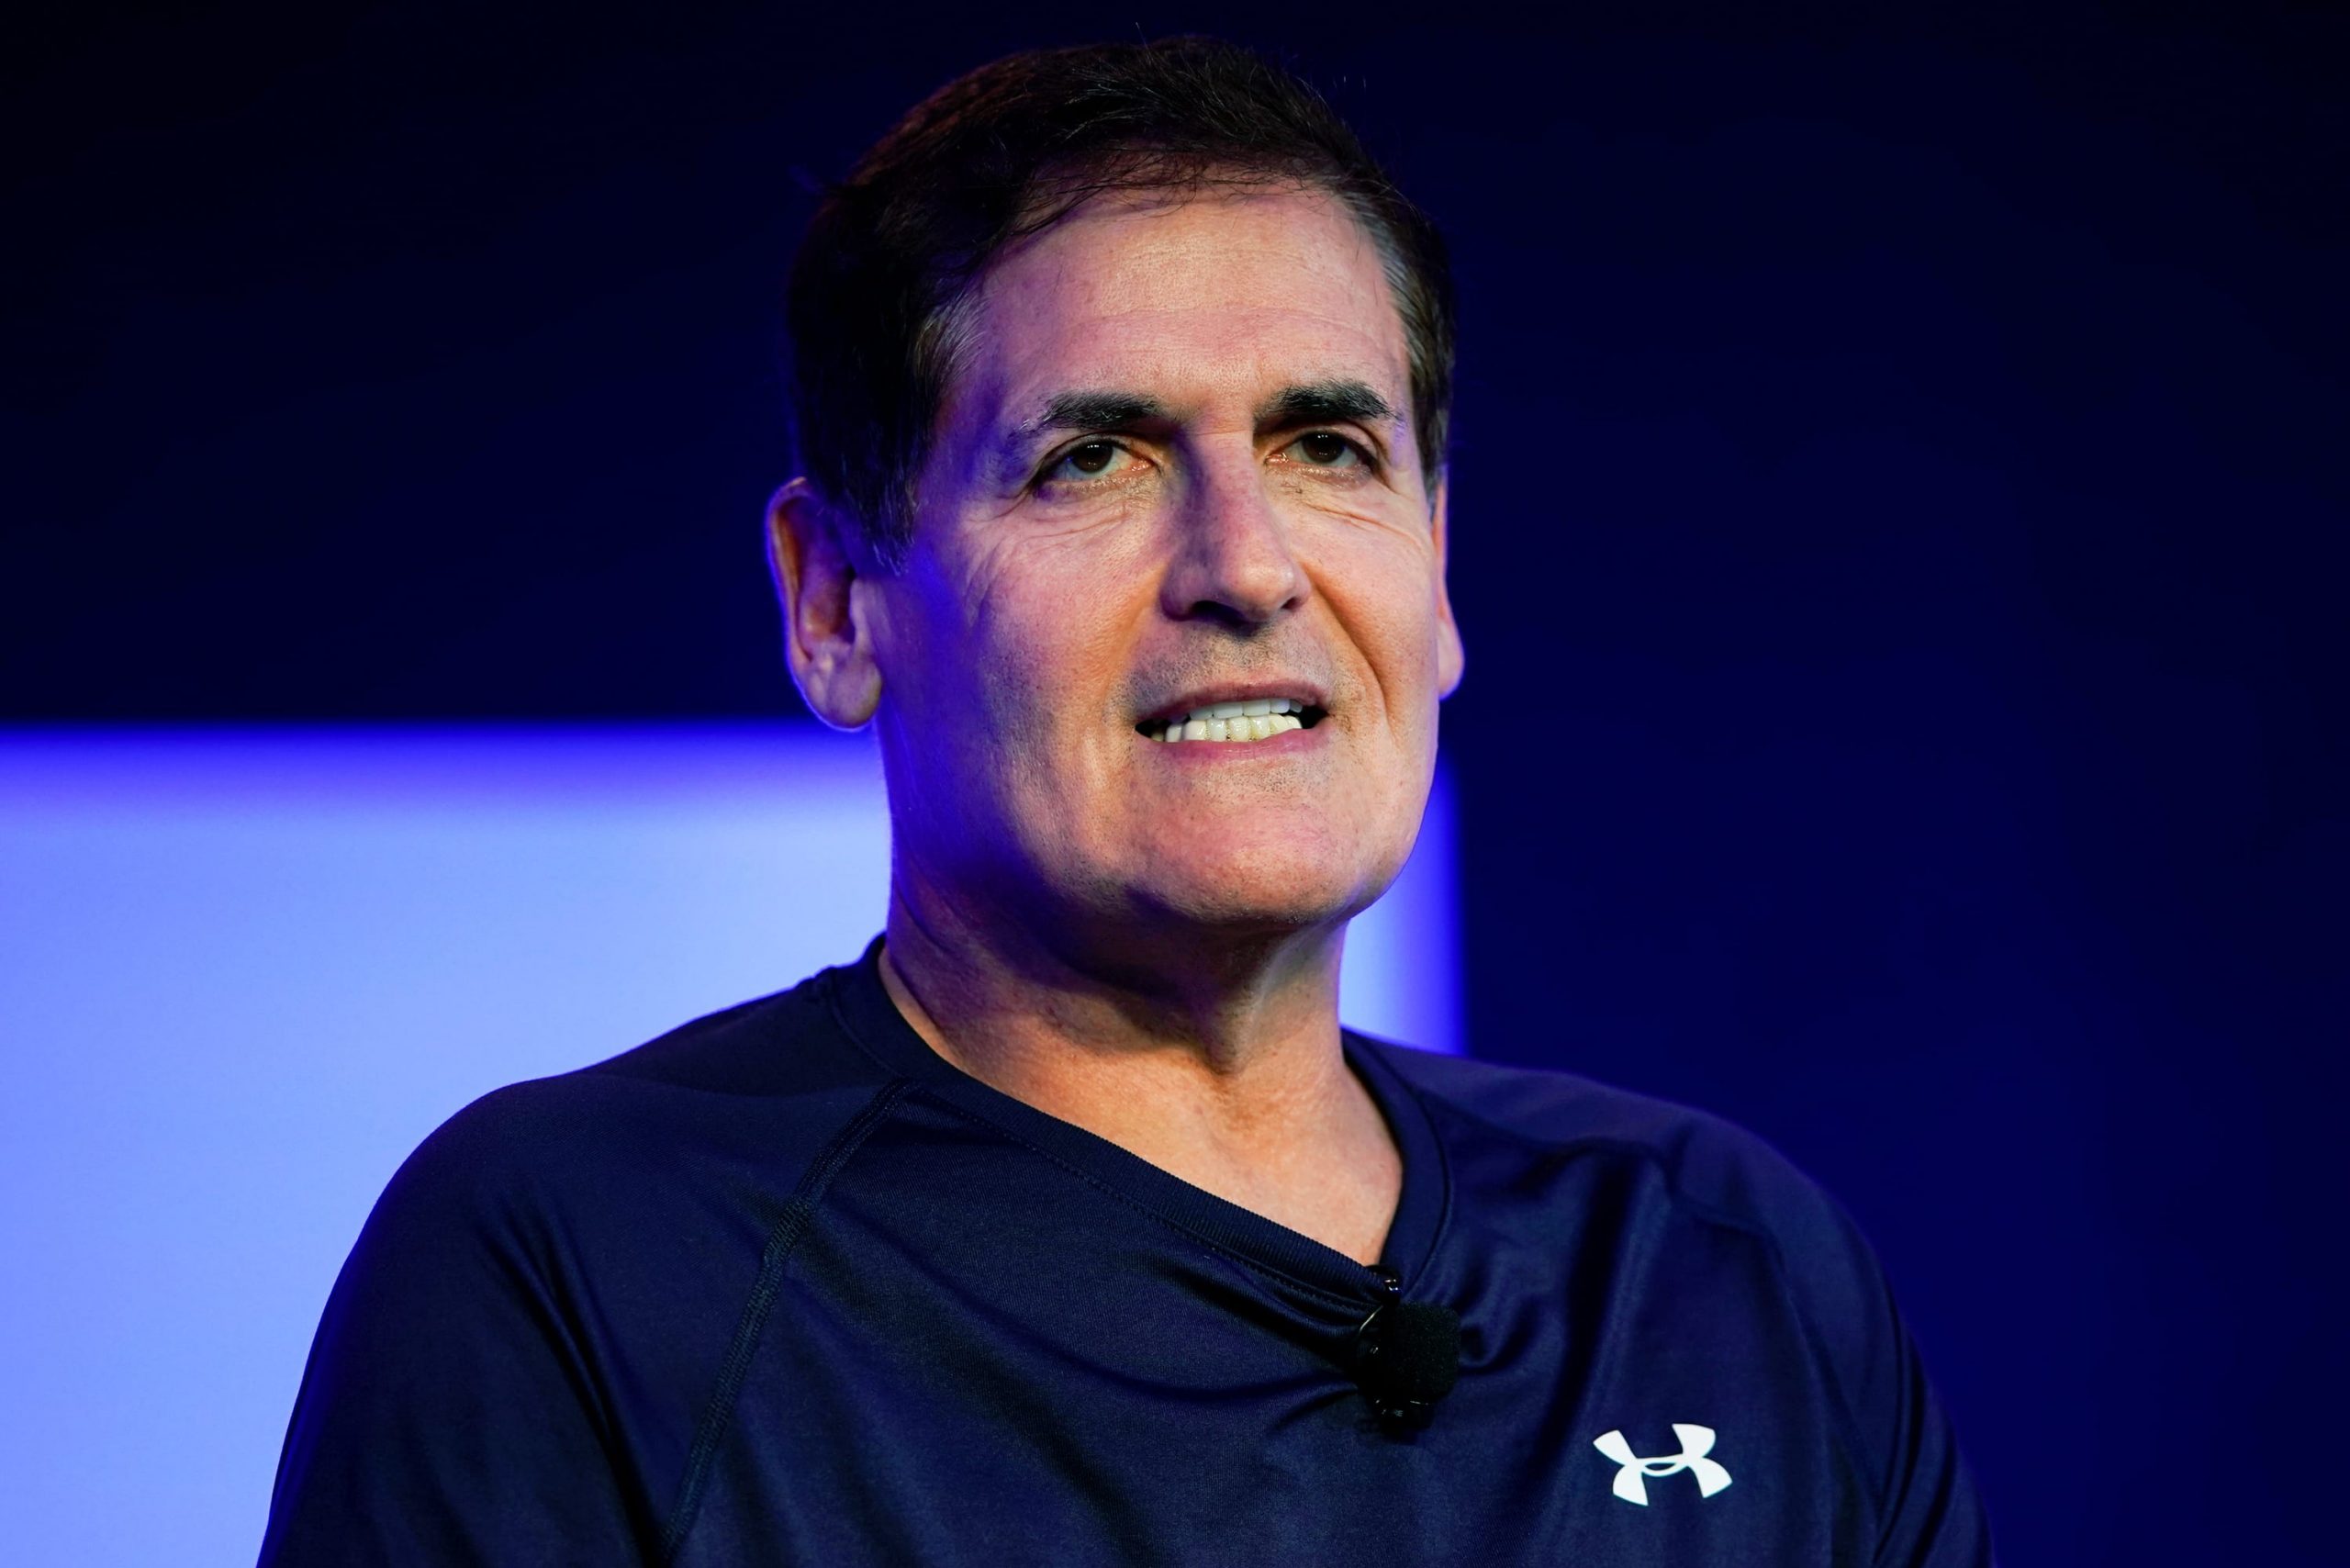 Mark Cuban on Shake Shack initially taking small business loan: ‘You’re going to kill your brand’